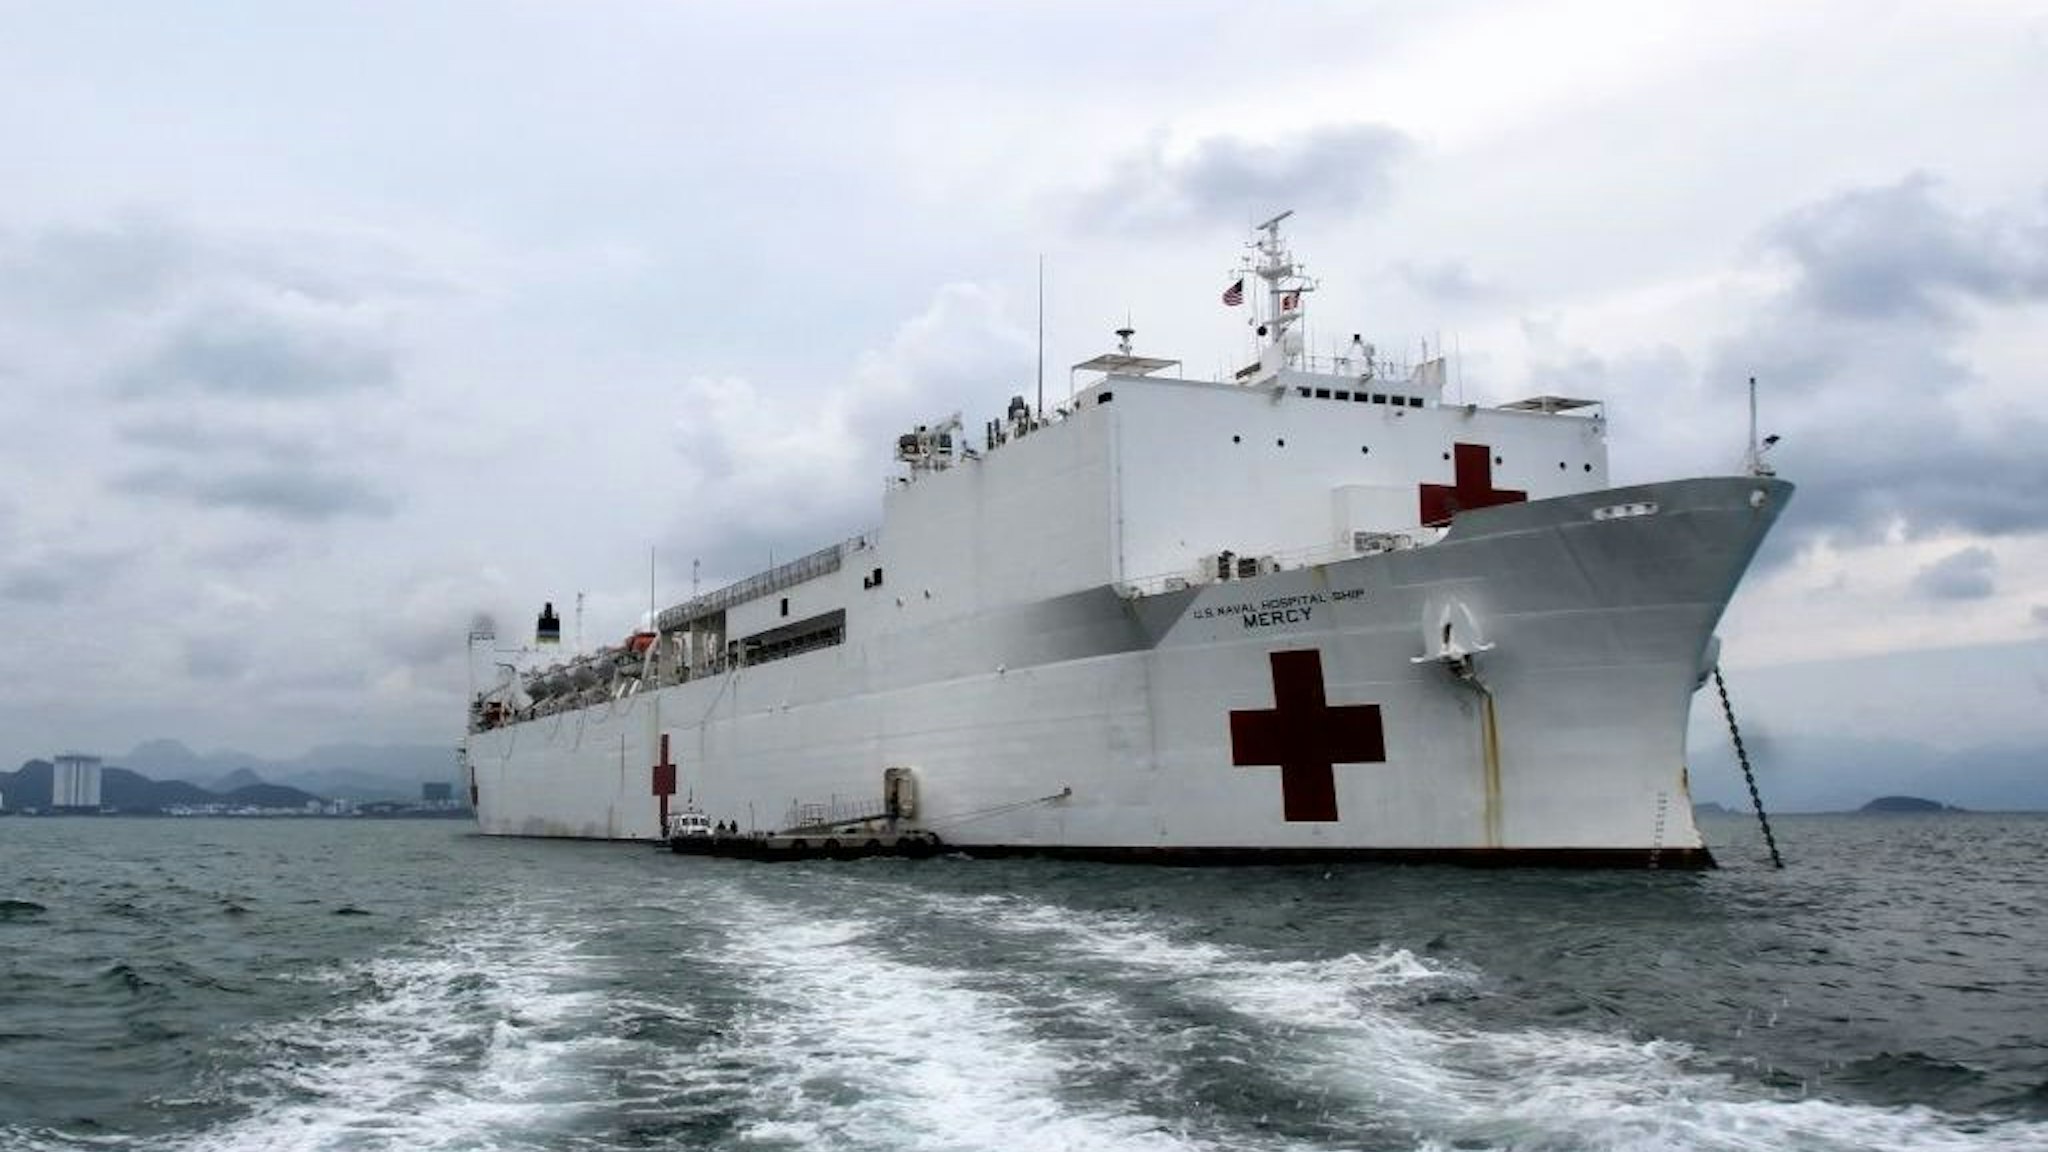 US Navy hospital ship USNS Mercy arrives in Nha Trang in central Vietnam on May 17, 2018 as part of a two-week Pacific Partnership mission involving multilateral humanitarian assistance and disaster relief preparedness aimed at boosting security ties between the former war foes. (Photo by Linh PHAM / AFP)